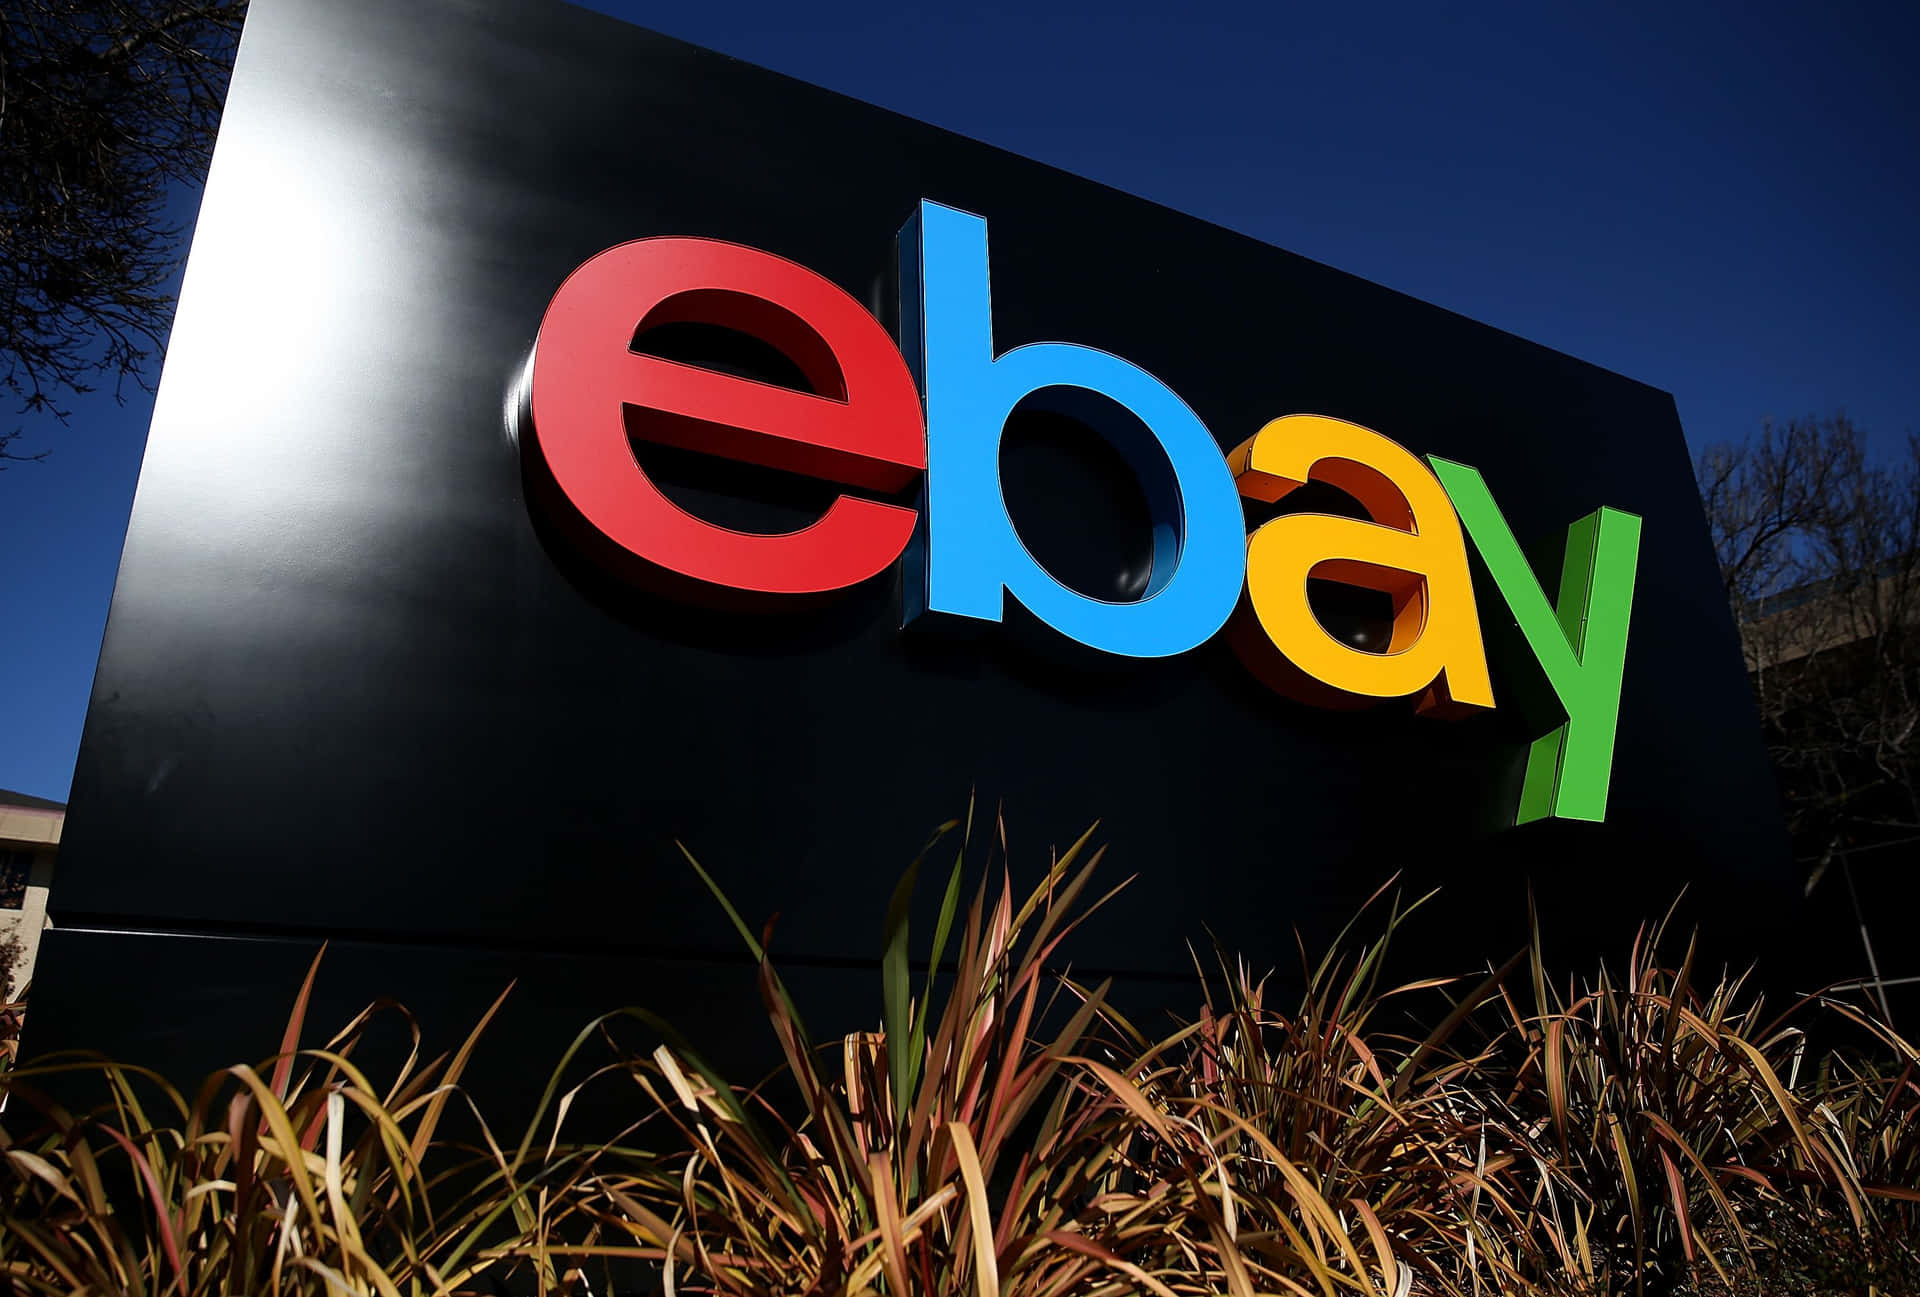 Low-angle Photo Of Ebay Uk Sign Wallpaper